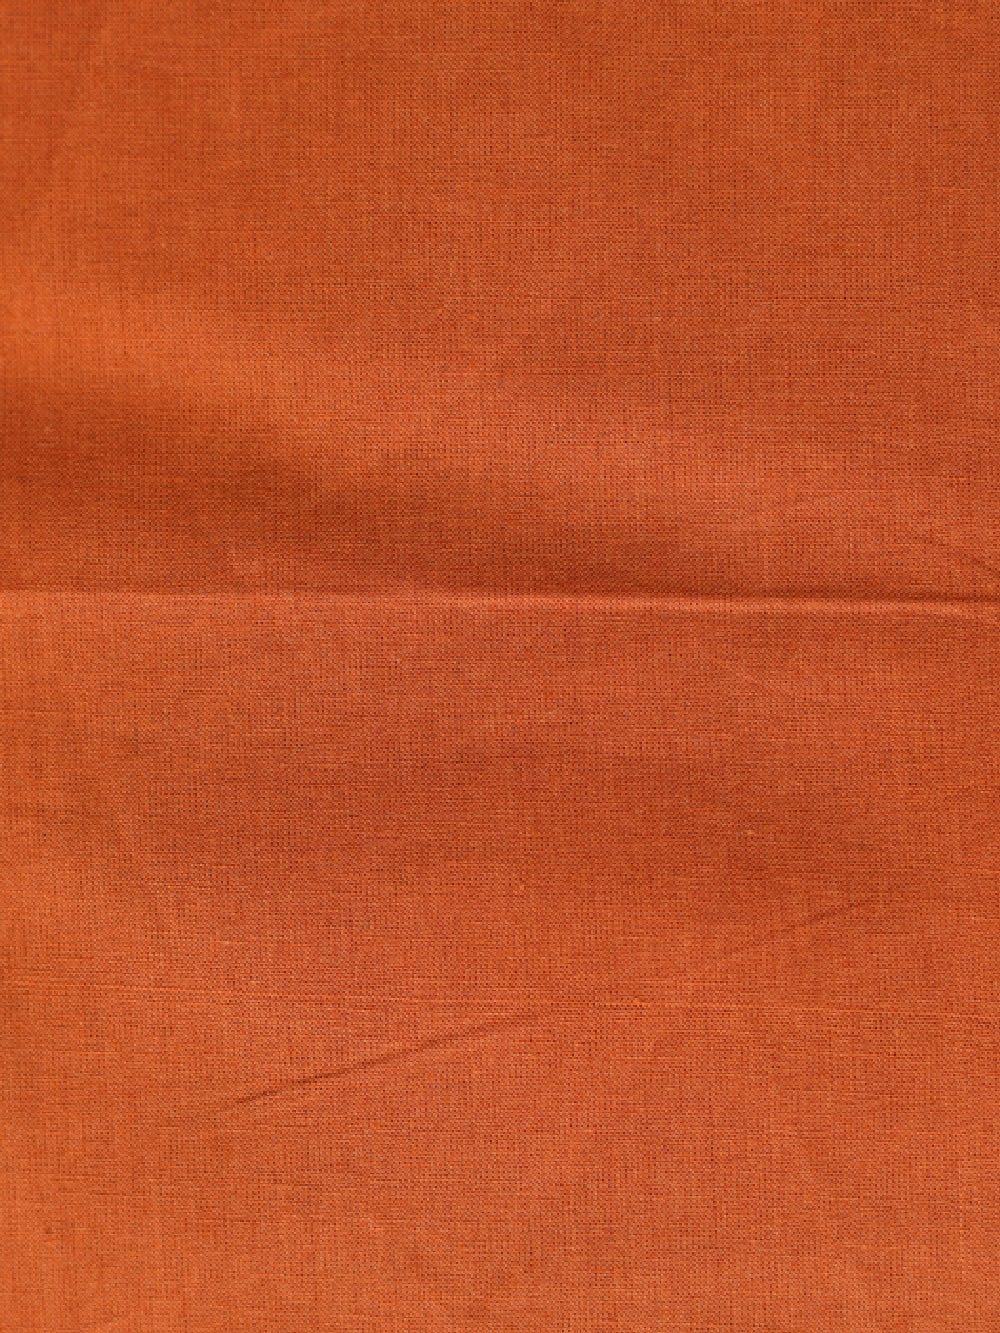 C-63 Brown Shade Solid Dyed Cotton Cambric Fabric